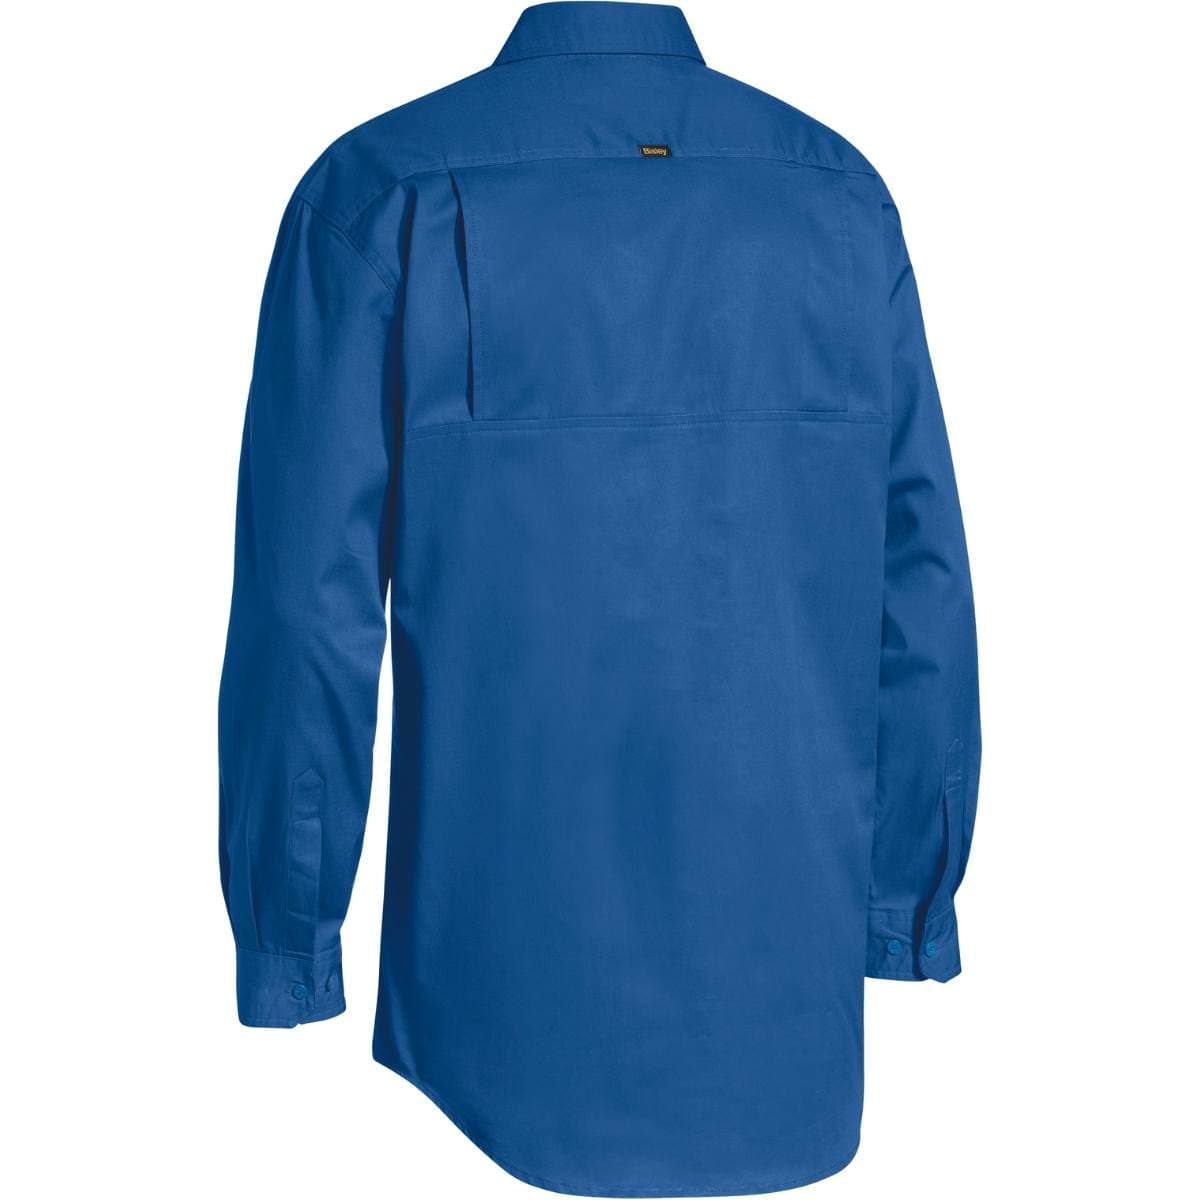 Bisley Closed Front Cool Lightweight Drill Shirt BSC6820